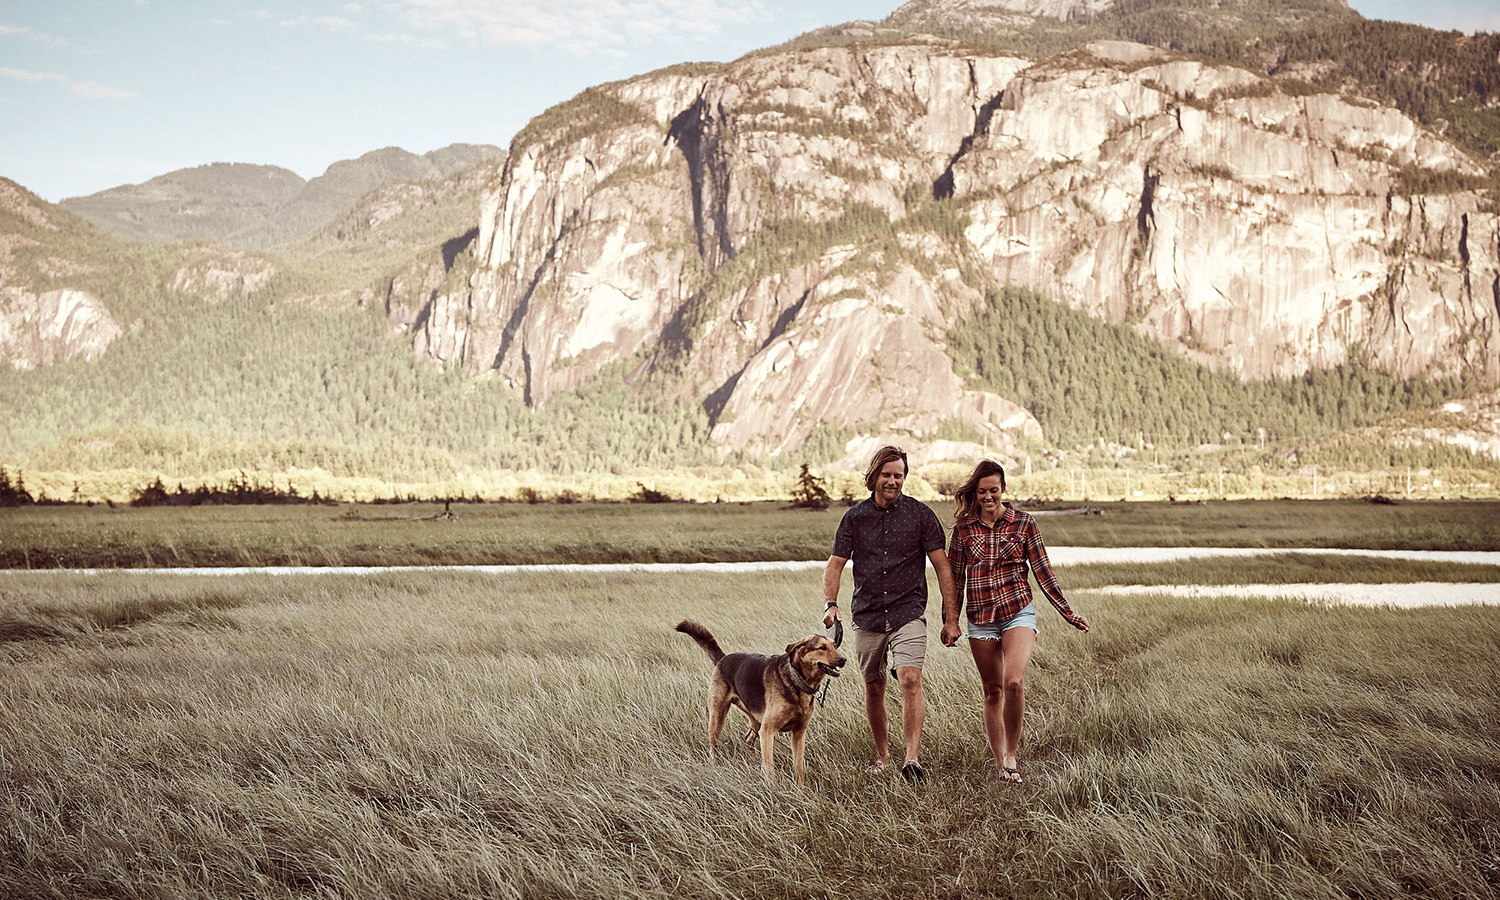 Couple walking with dog in a grassy field with mountains in the background